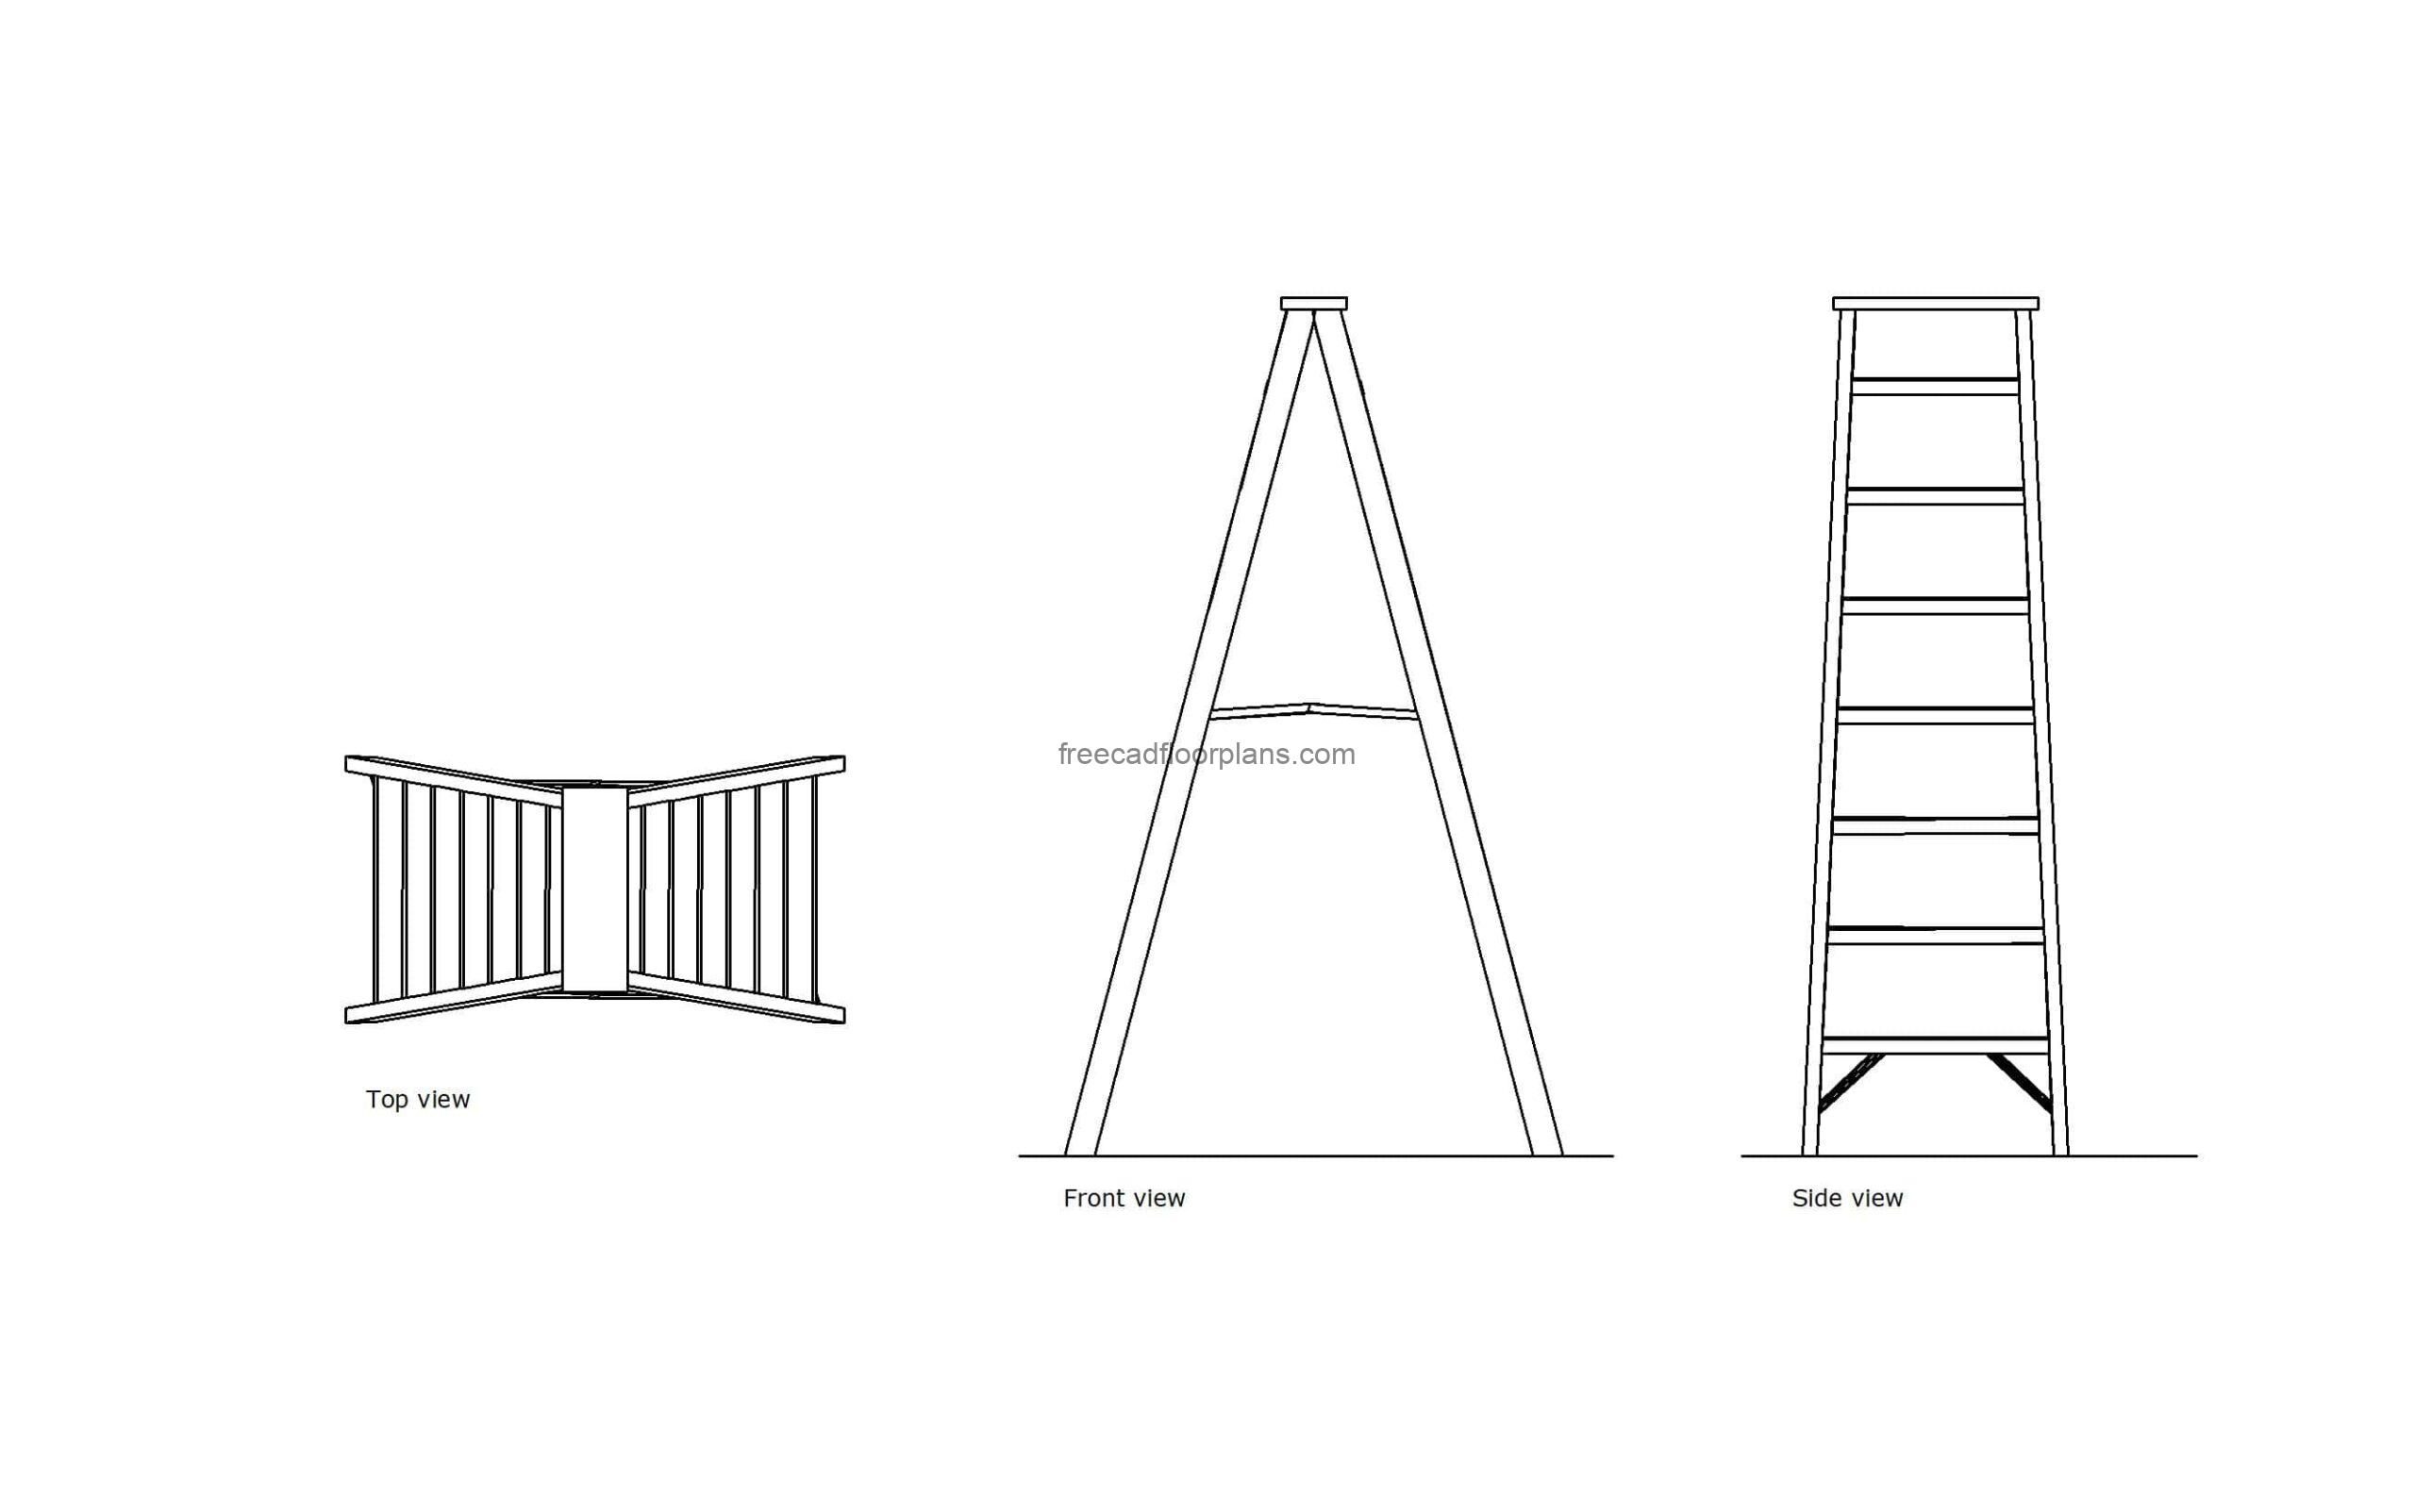 autocad drawing of a folding ladder, plan and elevation 2d views, dwg file free for download